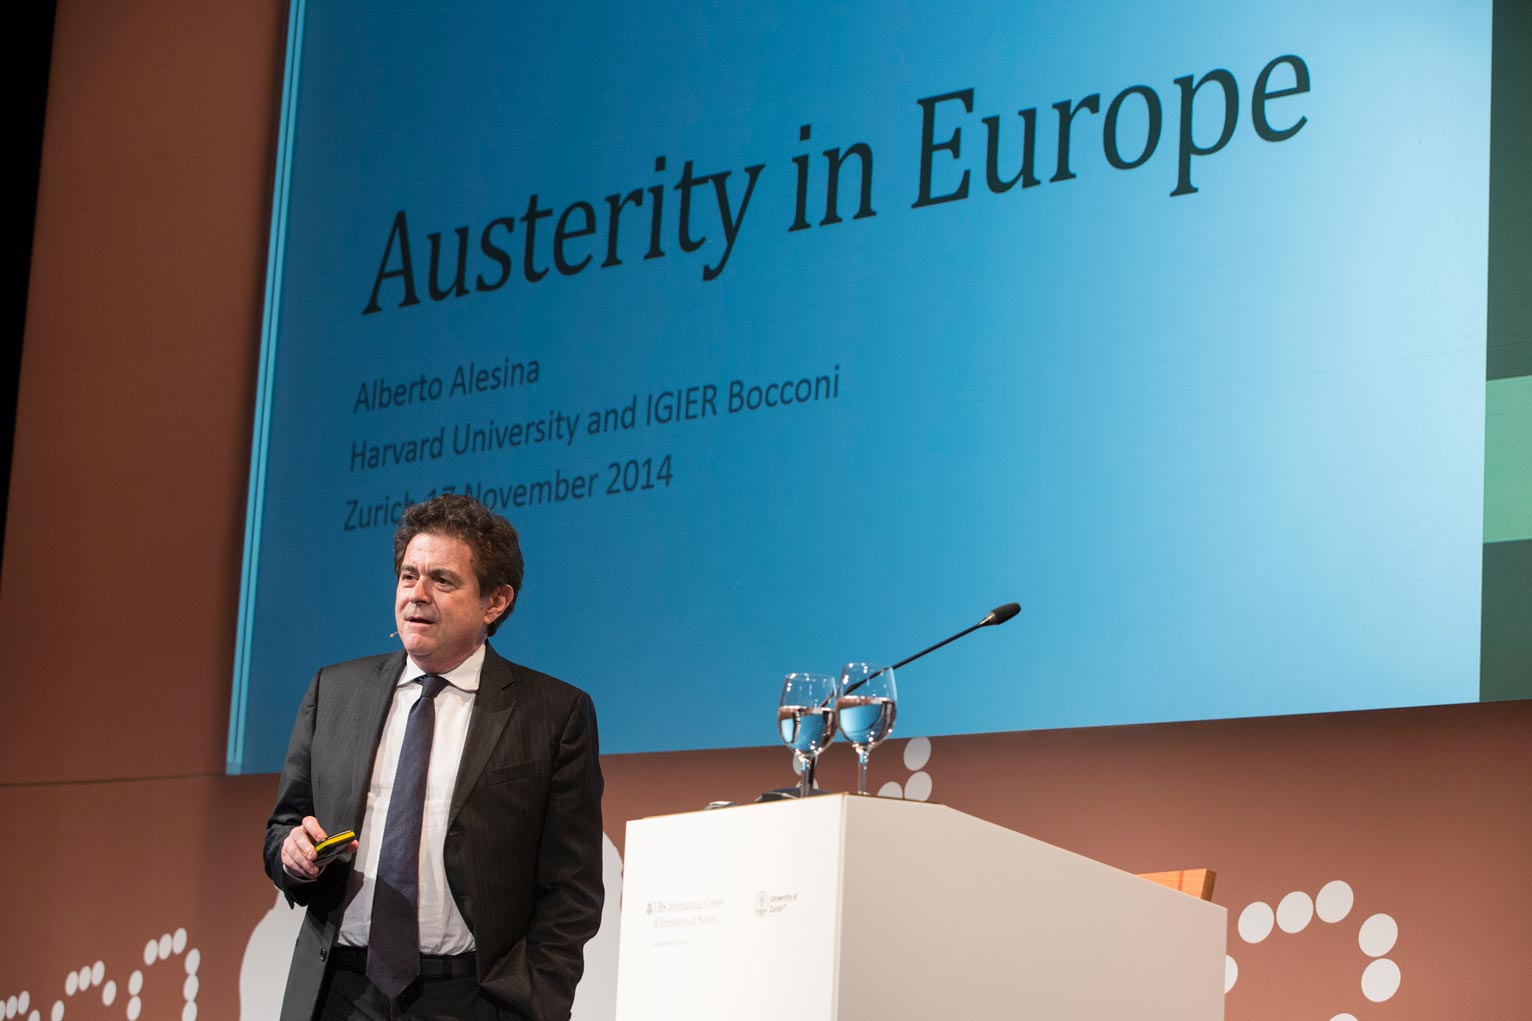 Alberto Alesina criticized Europe for not applying anti-cyclical fiscal policies